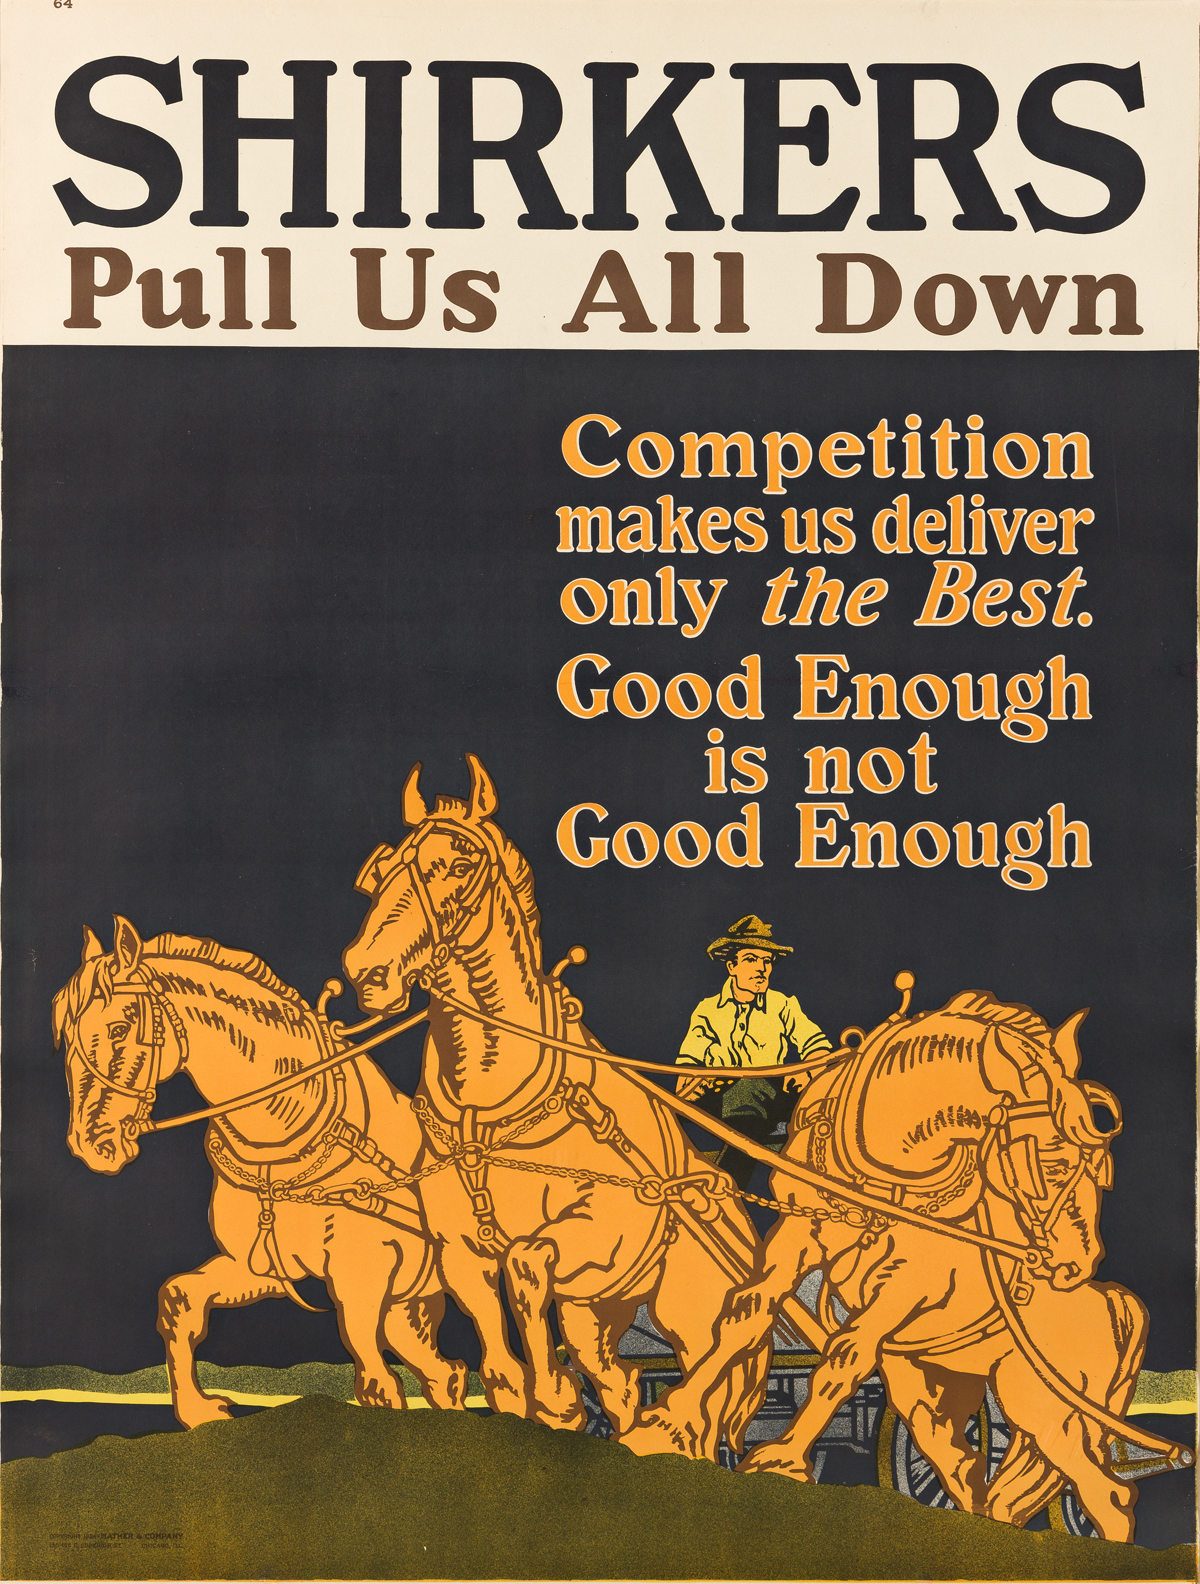 DESIGNER UNKNOWN.  SHIRKERS PULL US ALL DOWN. 1924. 48x36 inches, 122x91½ cm. Mather & Company, Chicago.